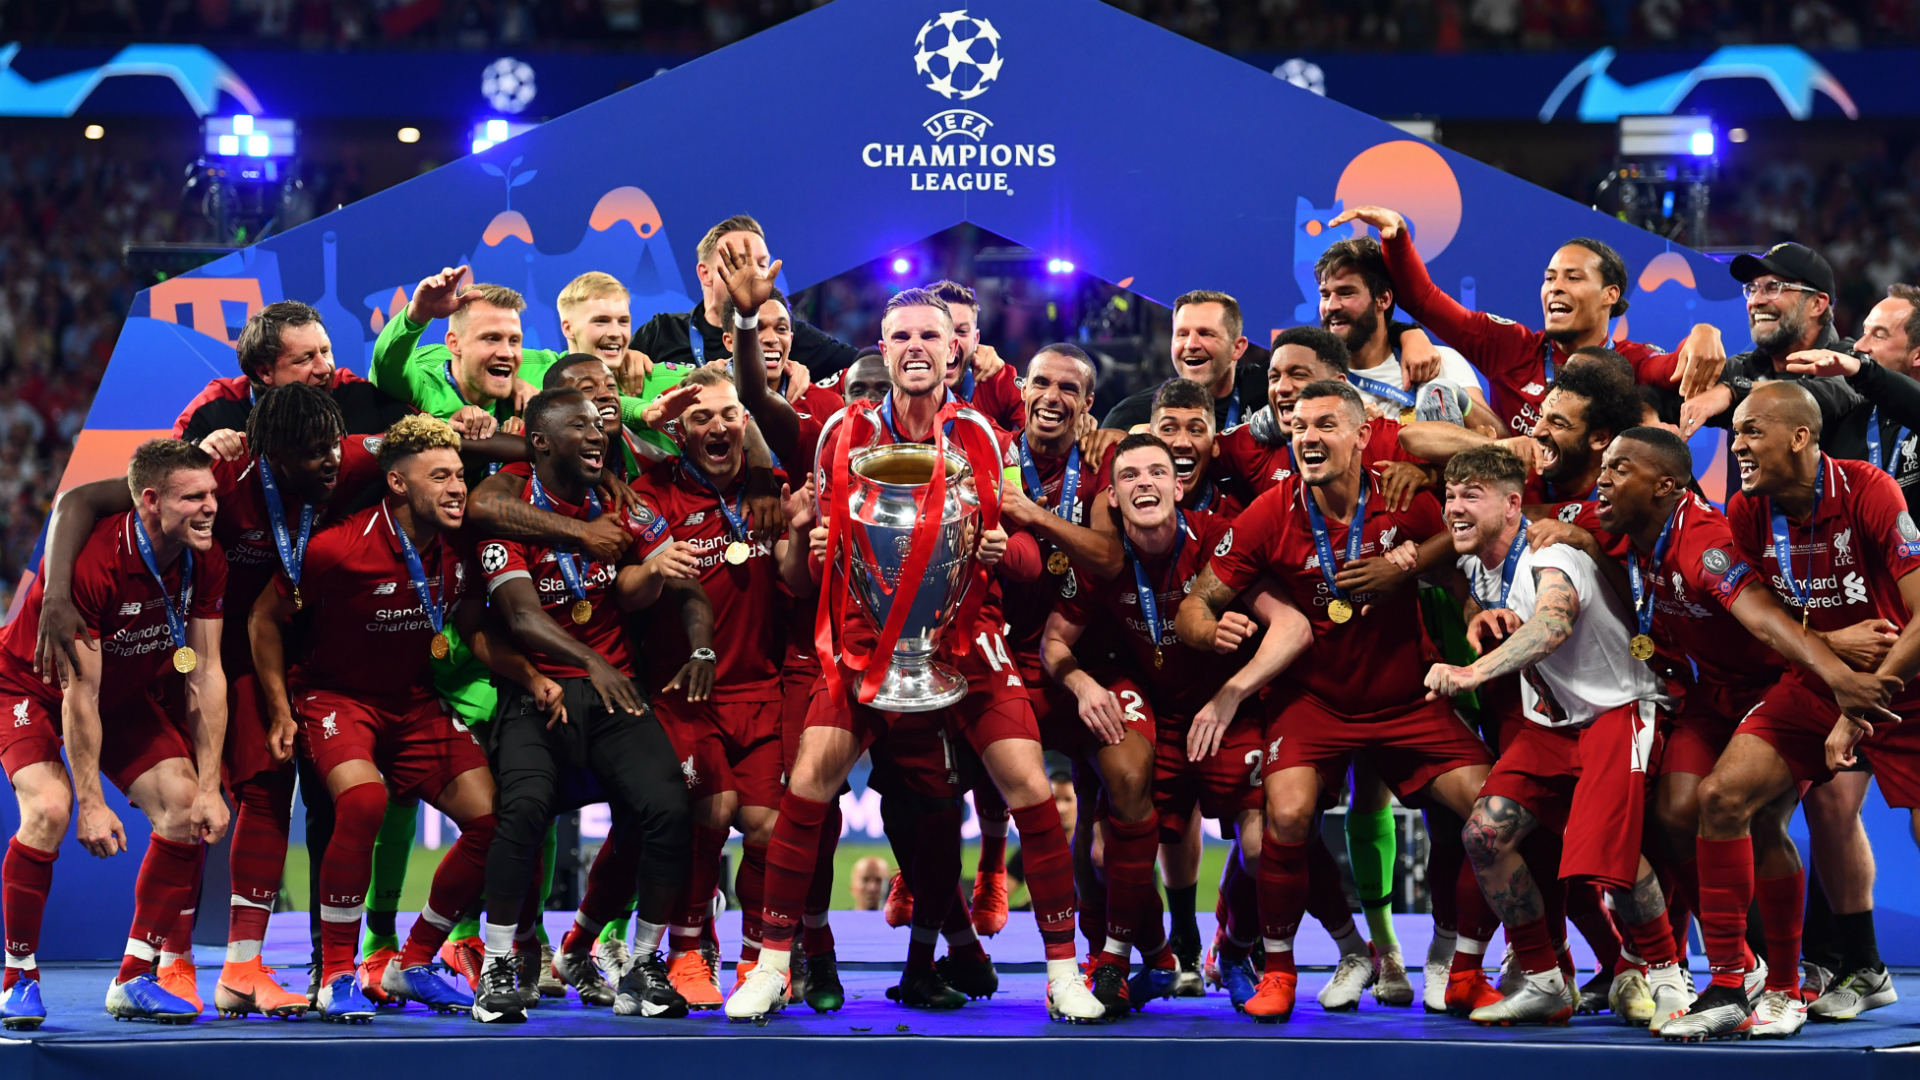 Frightening' Liverpool will win more titles after Champions League – Fowler